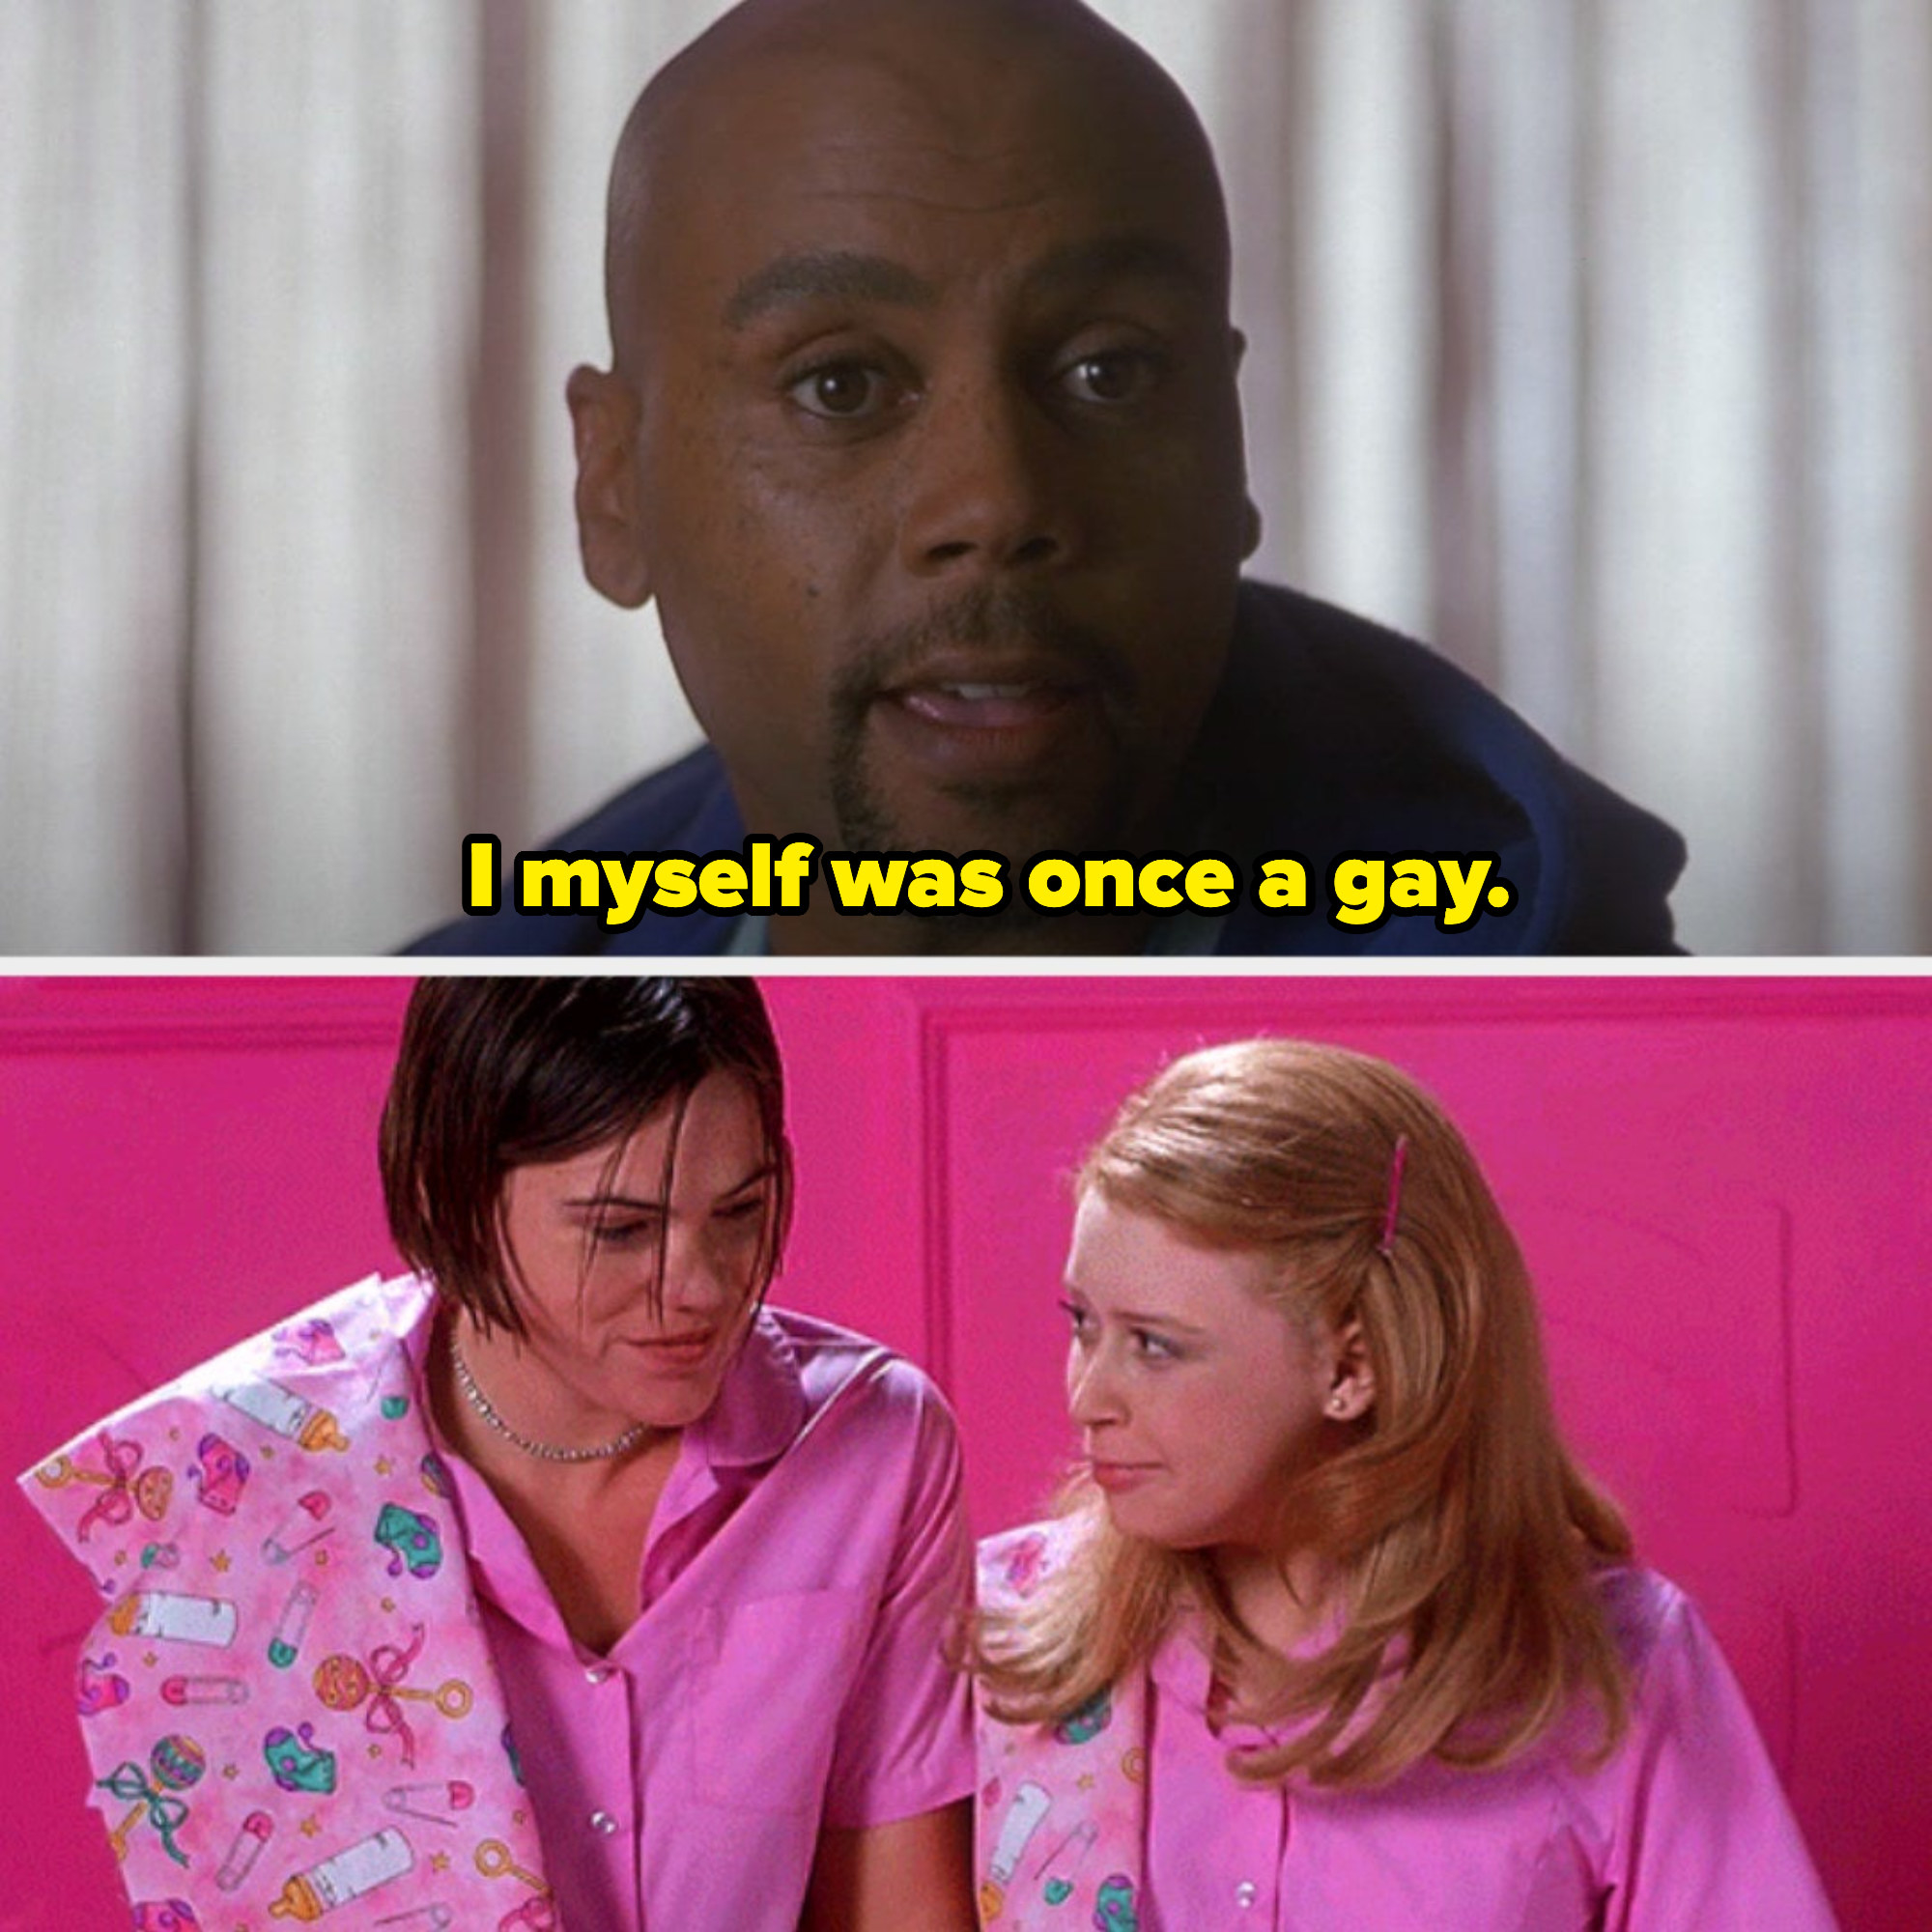 RuPaul saying: &quot;I myself was once a gay.&quot; Clea DuVall and Natasha Lyonne looking cutely at each other